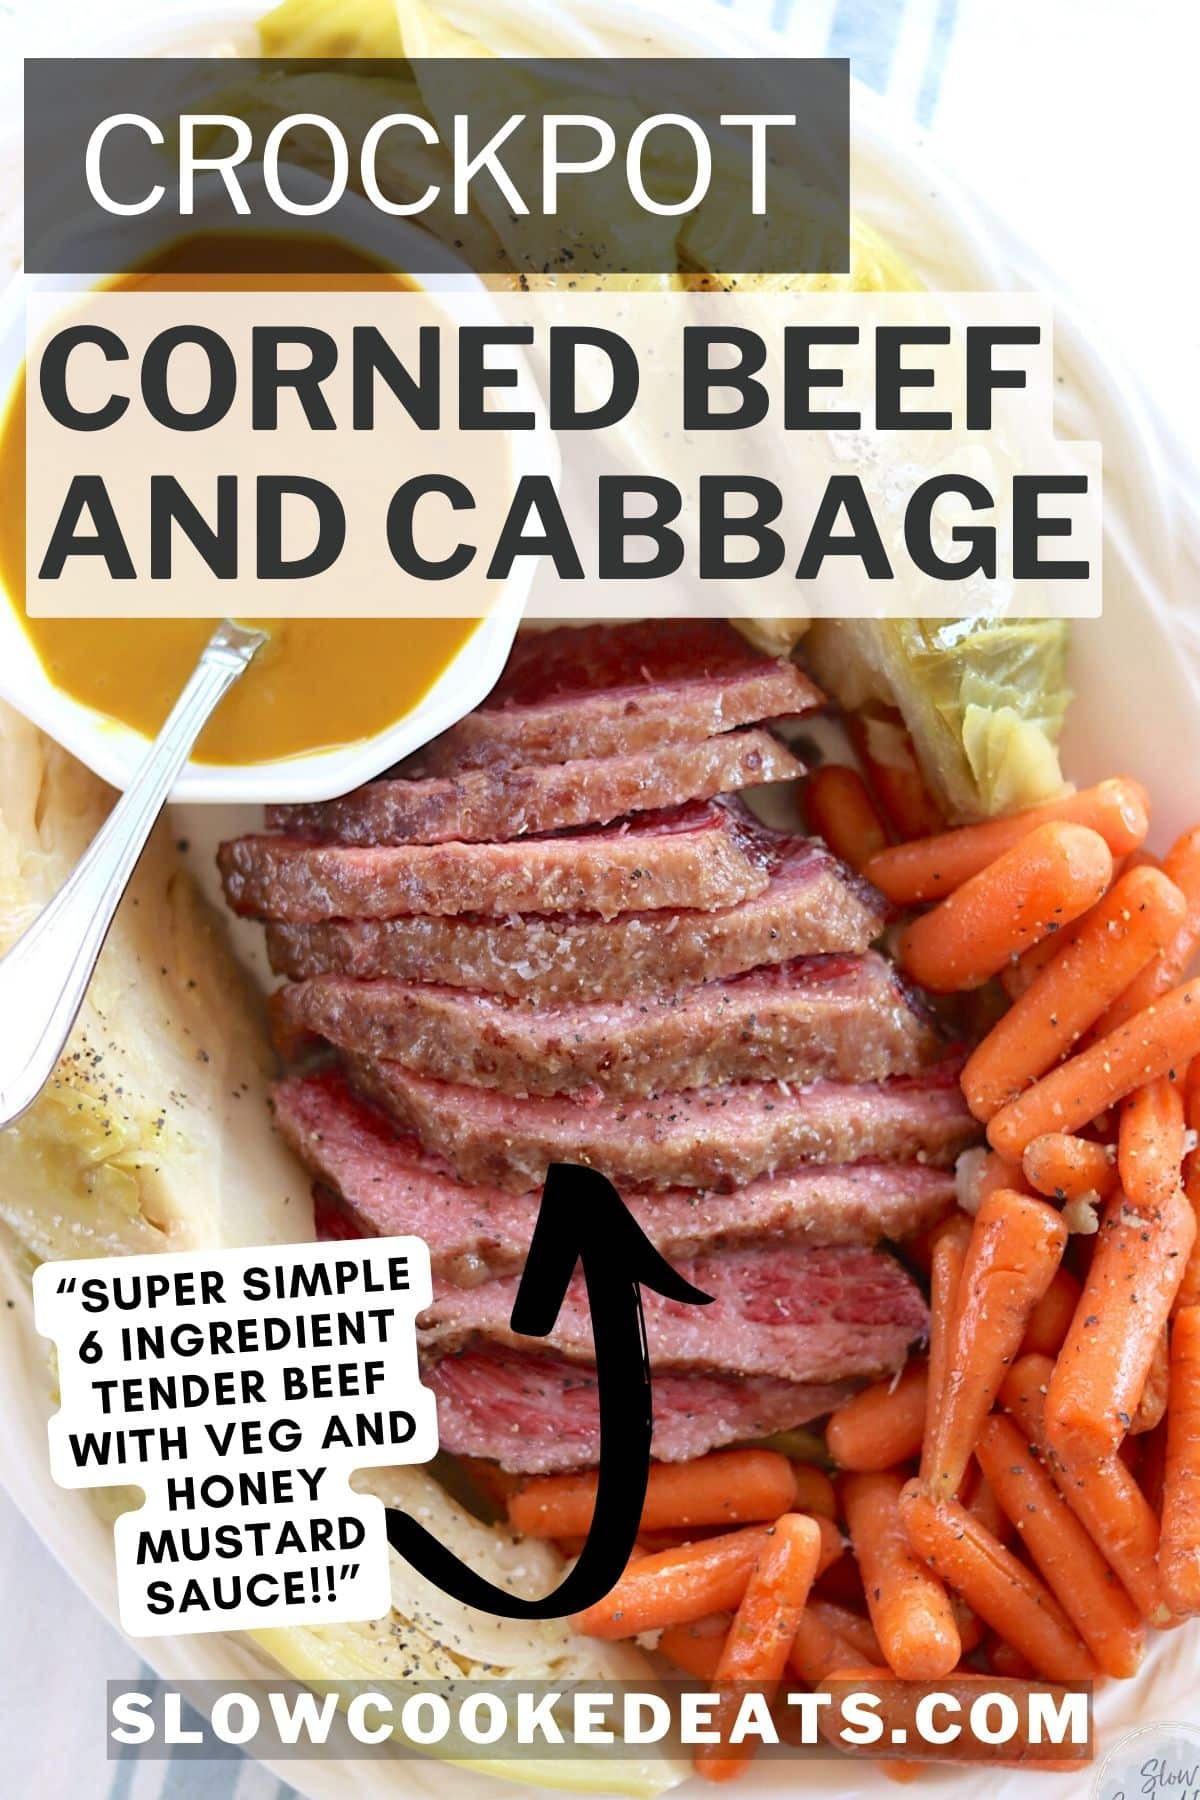 Sliced crockpot corned beef and cabbage with carrots on a white platter.